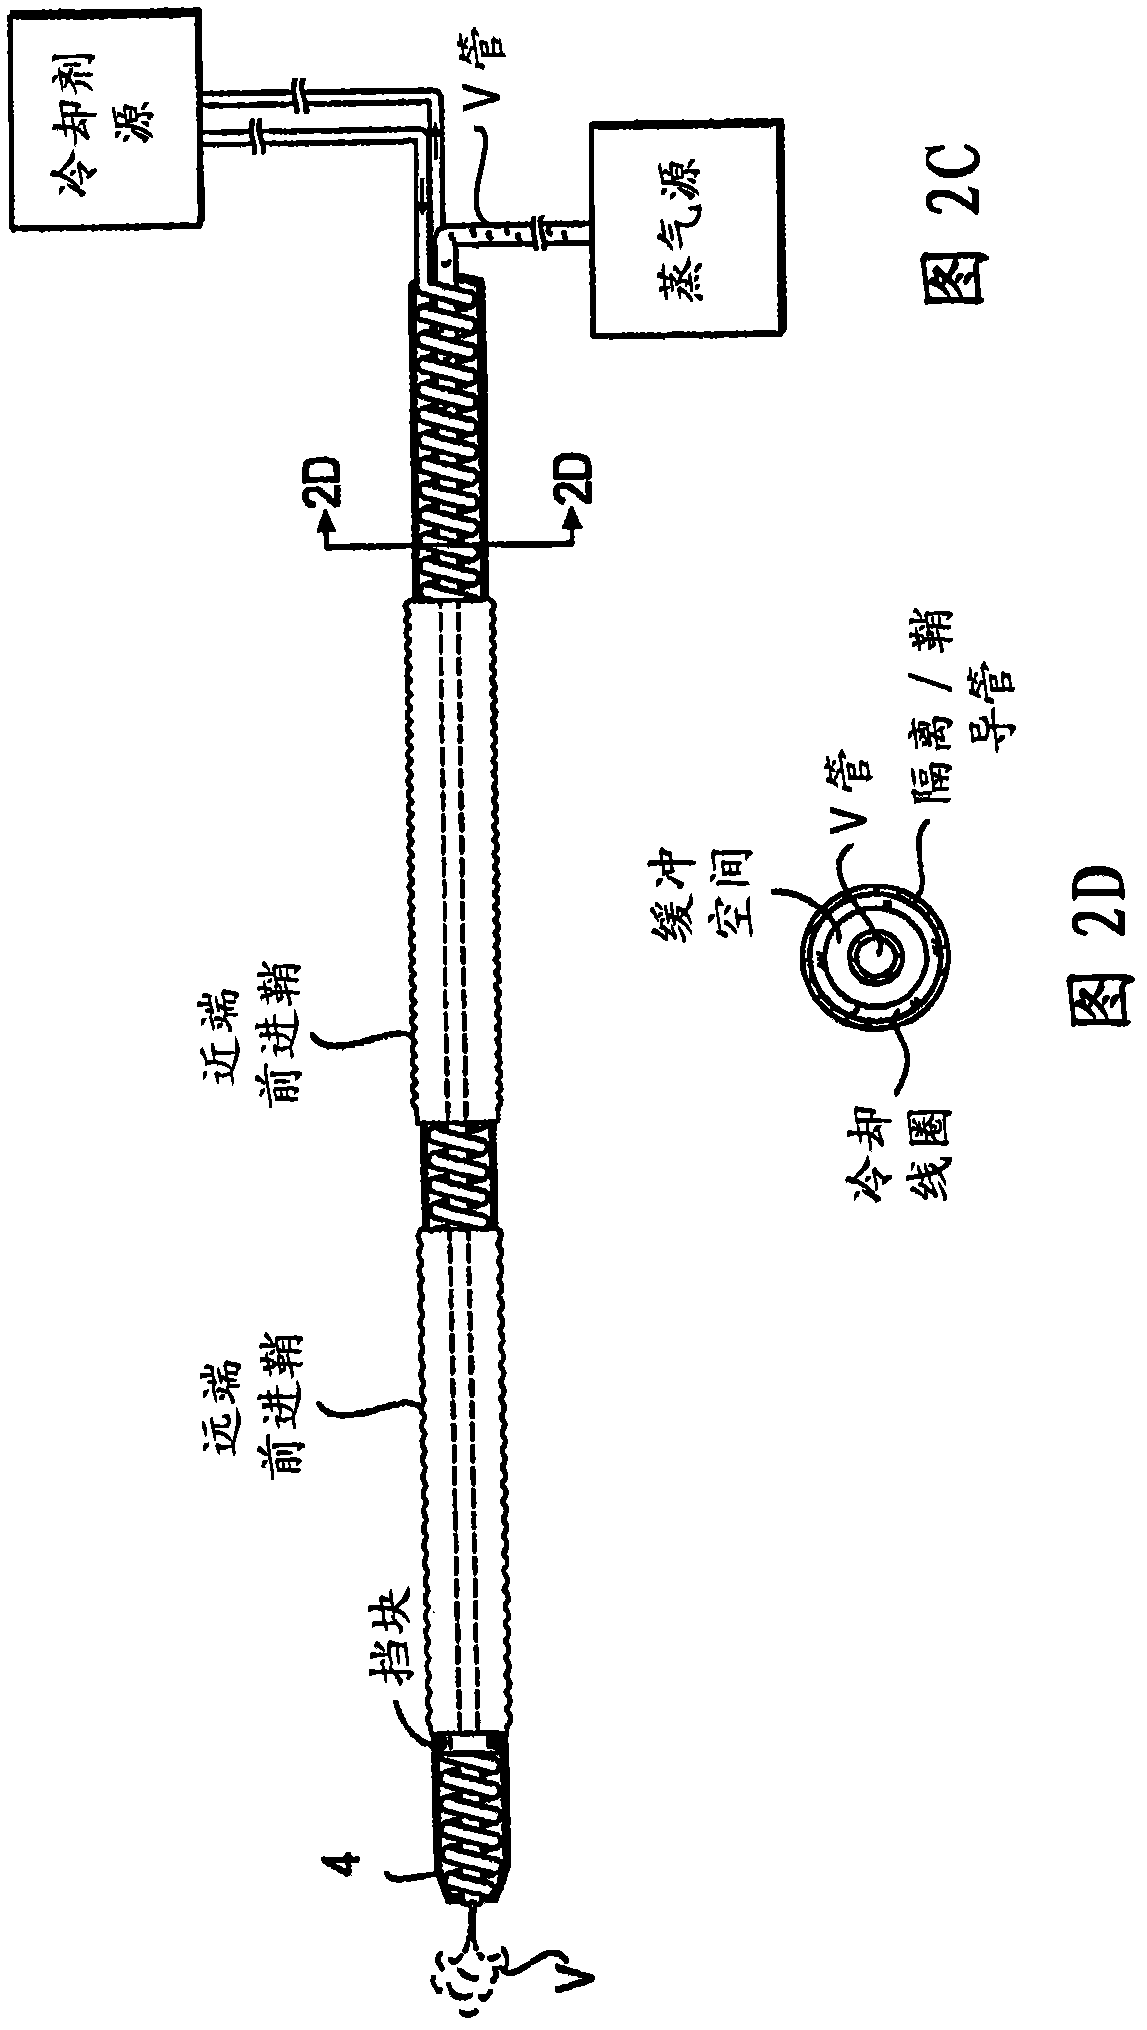 Vein therapy device and method